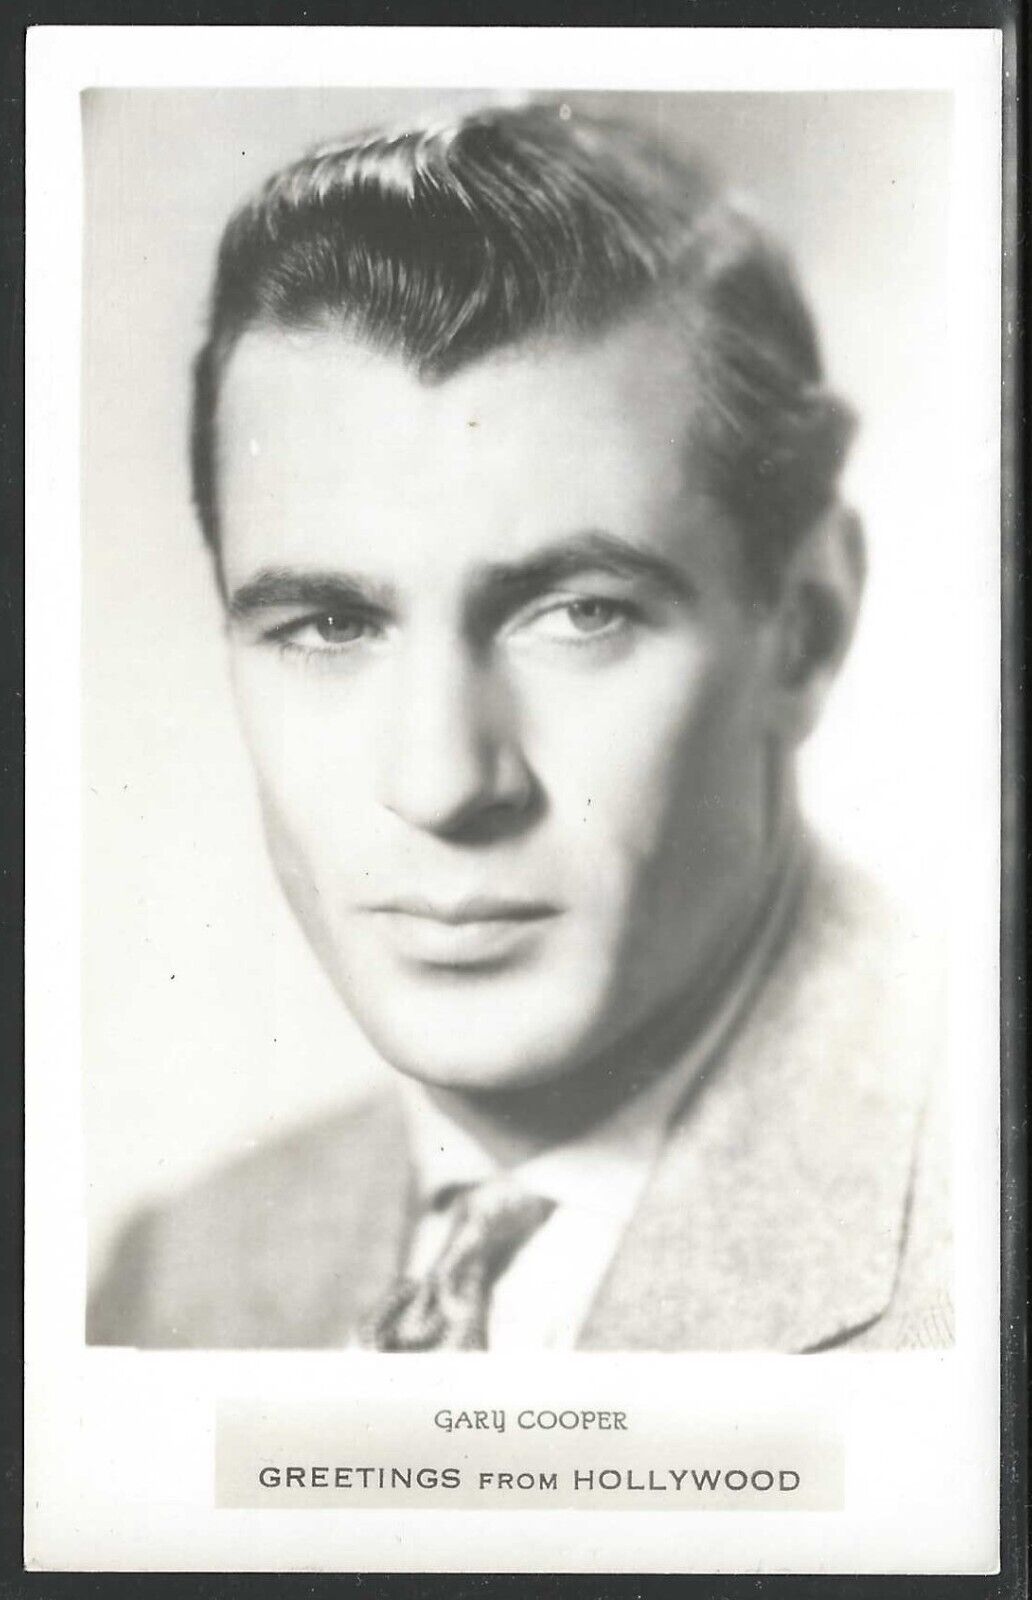 Gary Cooper, Greetings from Hollywood, Circa 1920's-1930's Real Photo Postcard